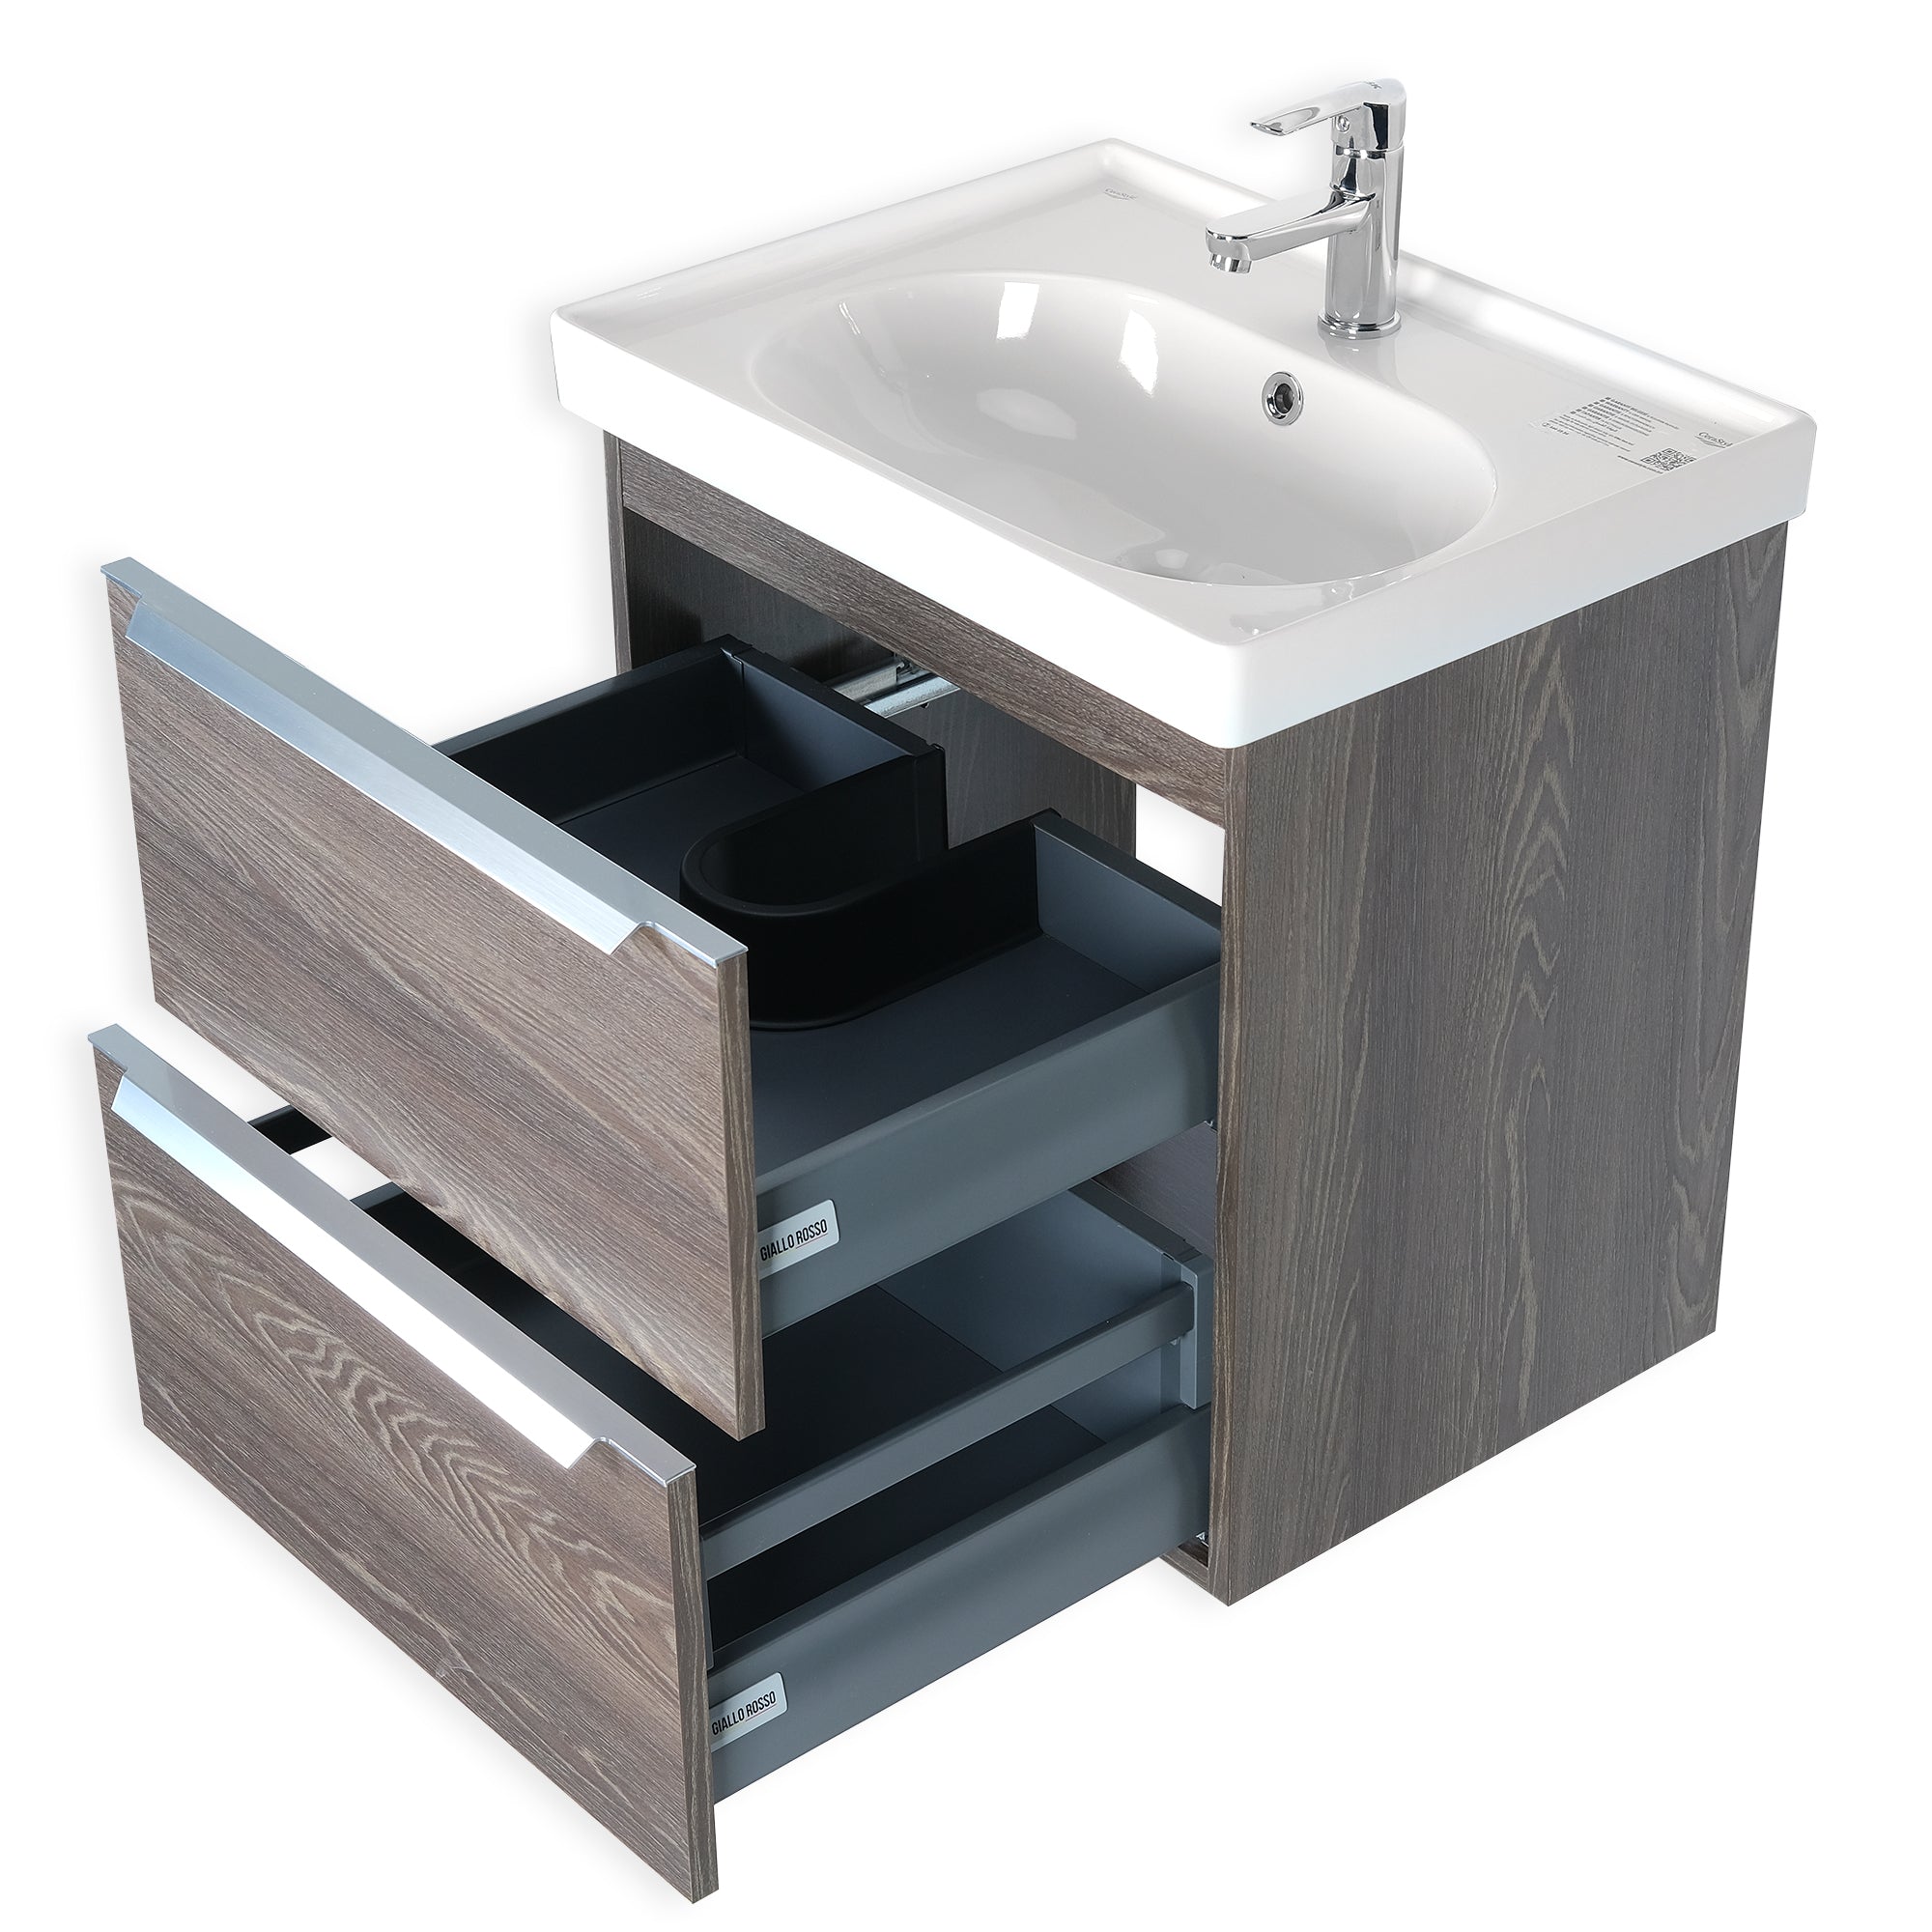 ARGENTO 24 INCH MODERN WALL MOUNT VANITY AND SINK COMBO - FOGIA GRAY